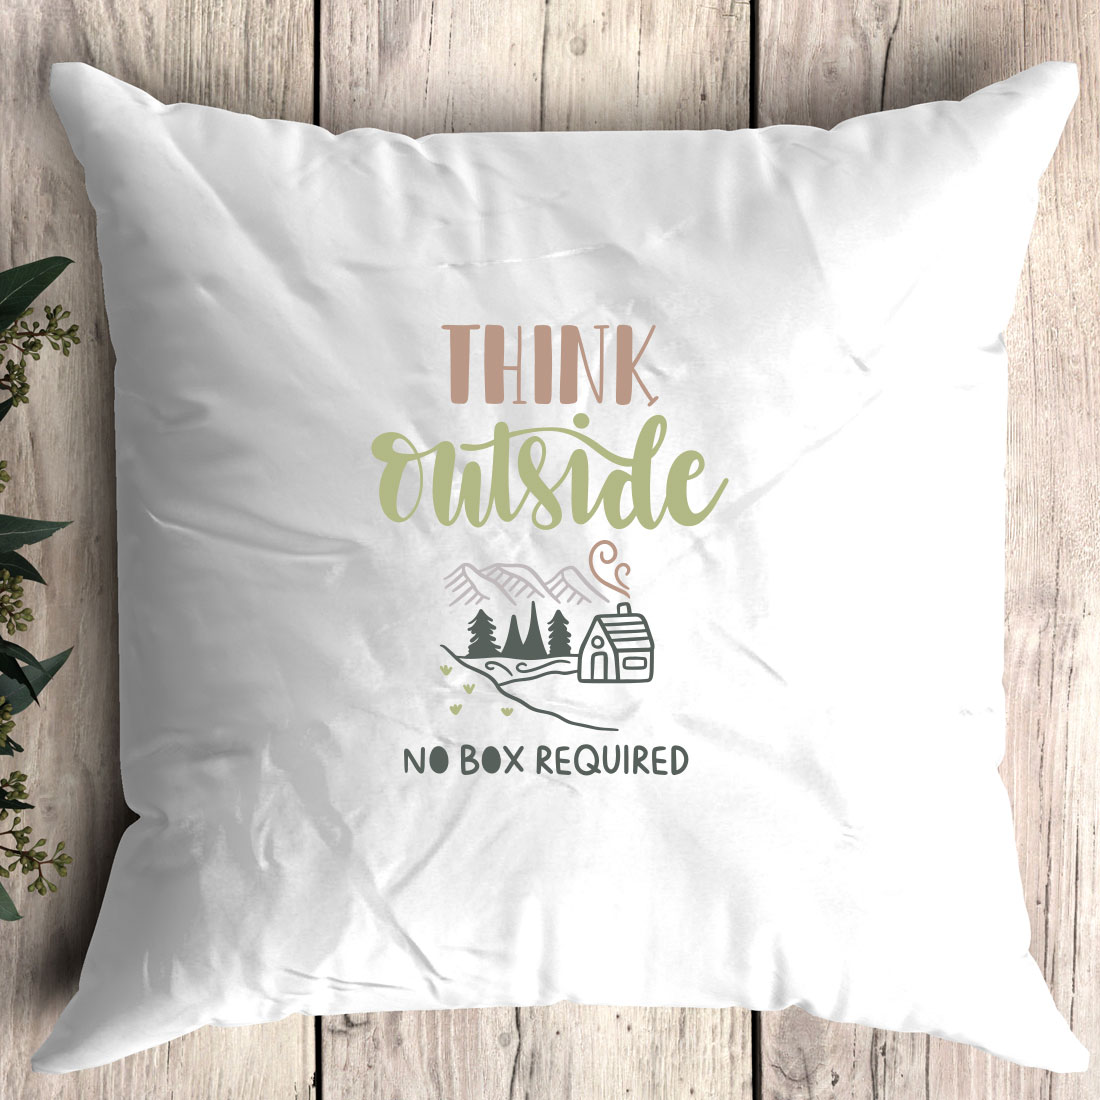 Pillow that says think outside no box required.